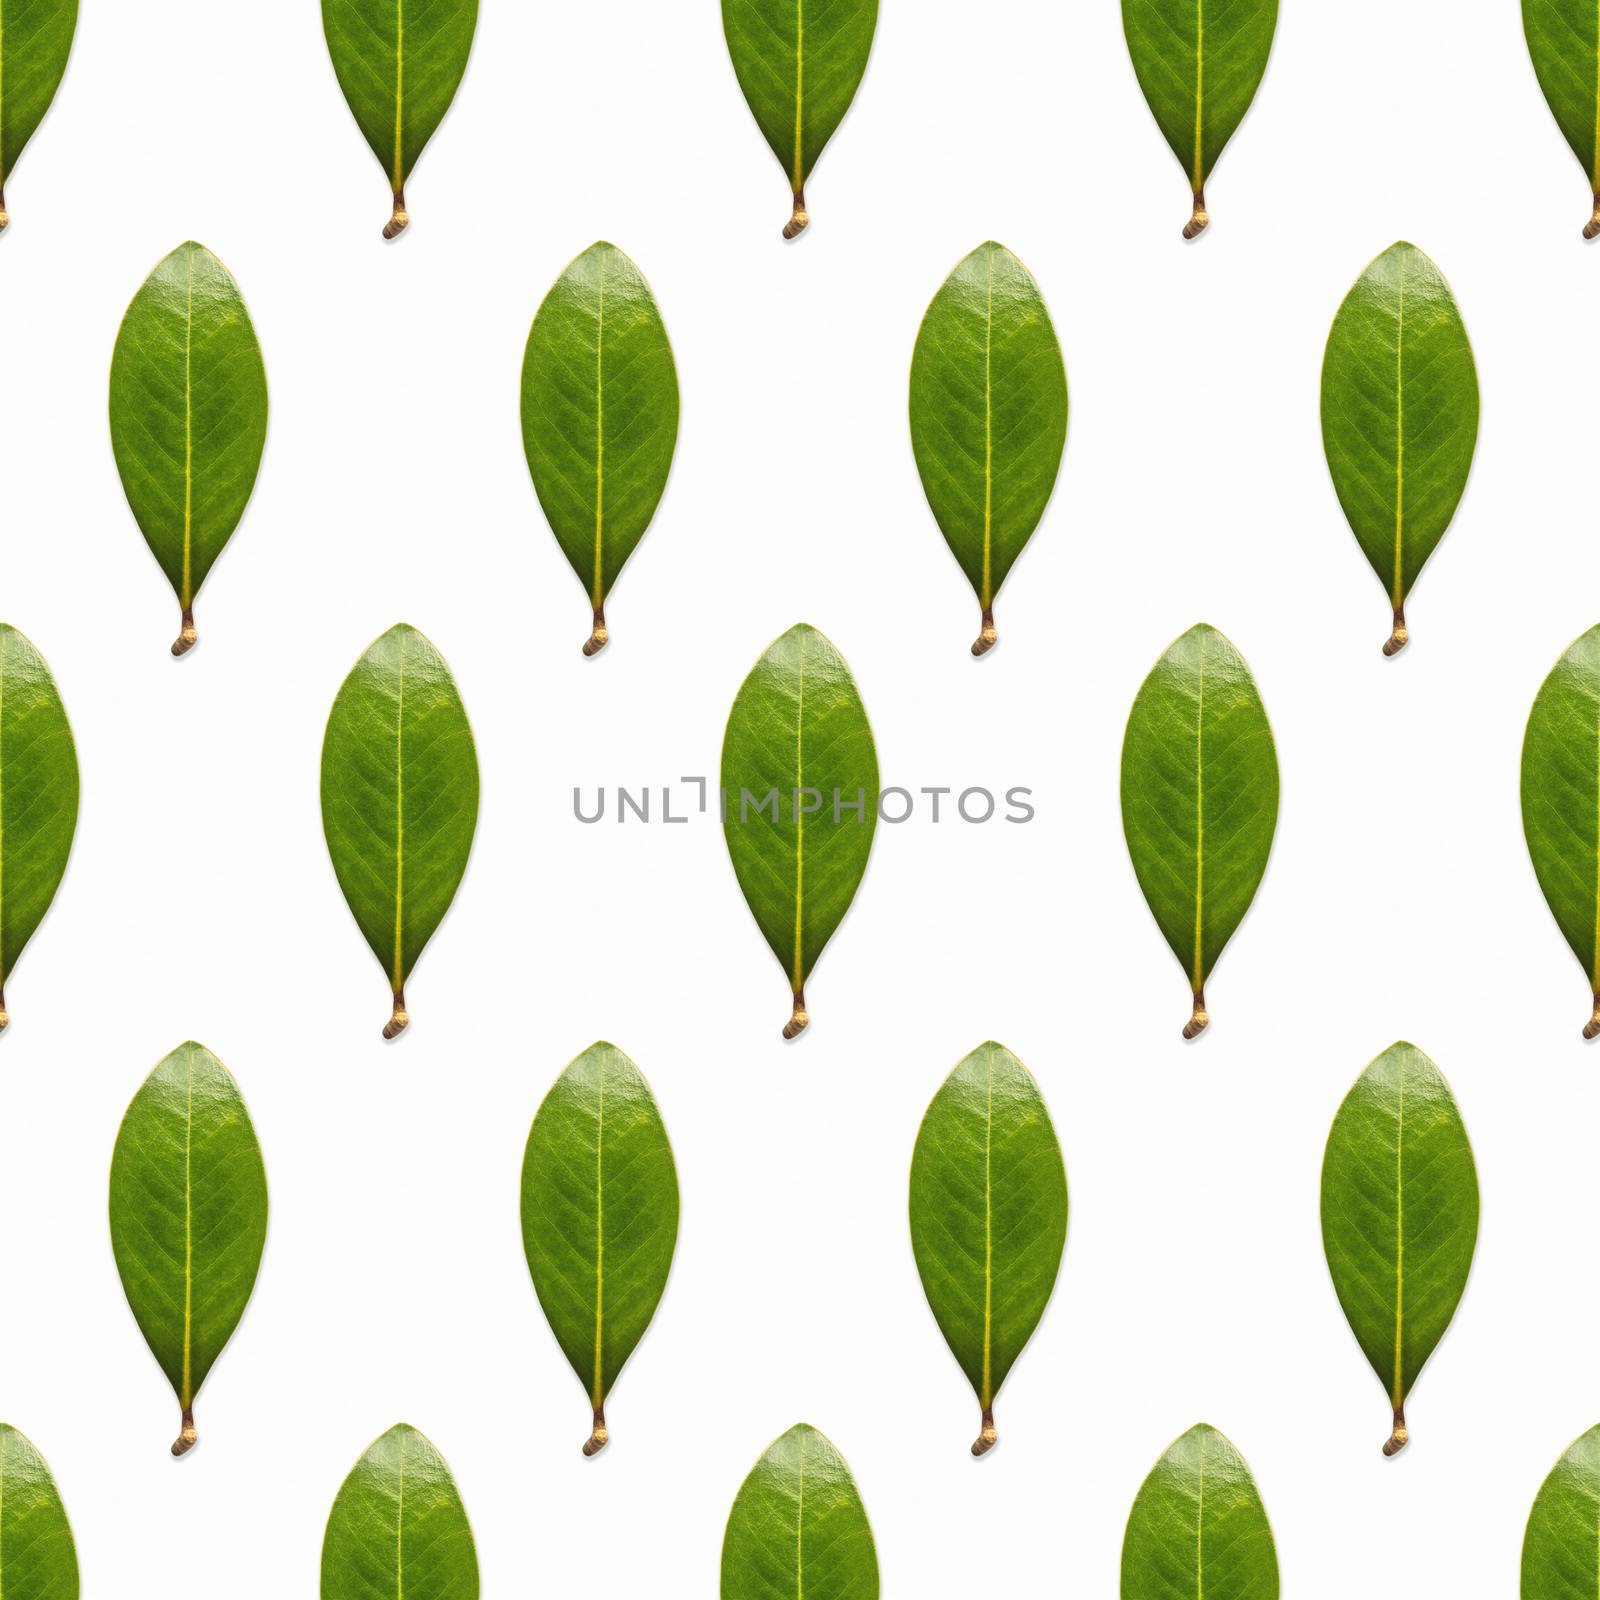 Seamless pattern made of photos of fresh green leaves. Natural background with scattered plants.